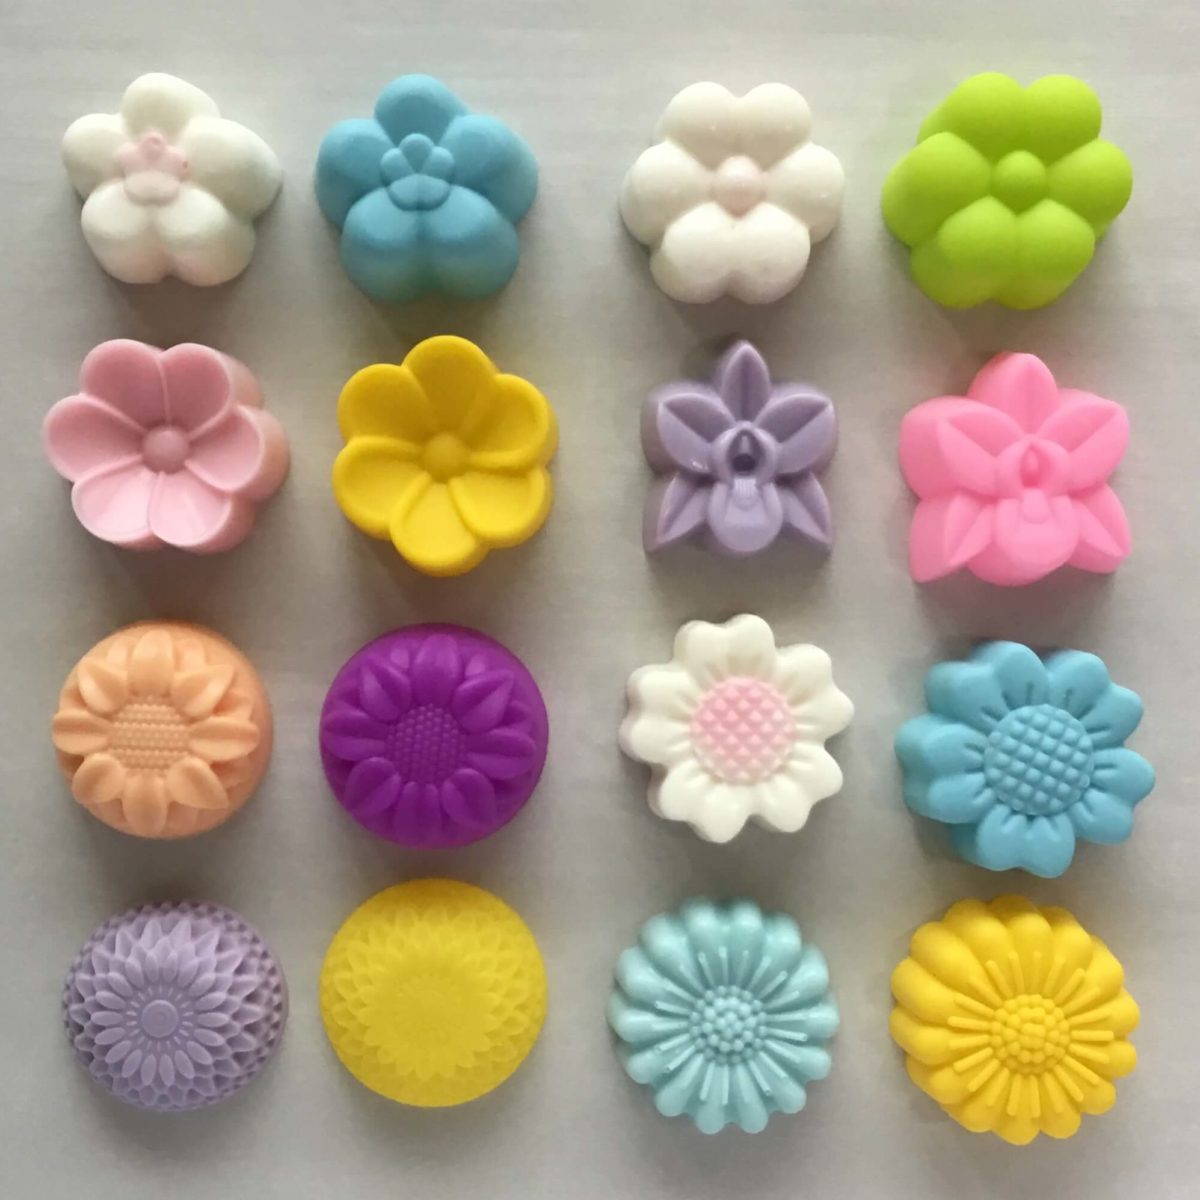 5cm single cavity silicone moulds in assorted flower designs placed next to soap bars that were made with the moulds